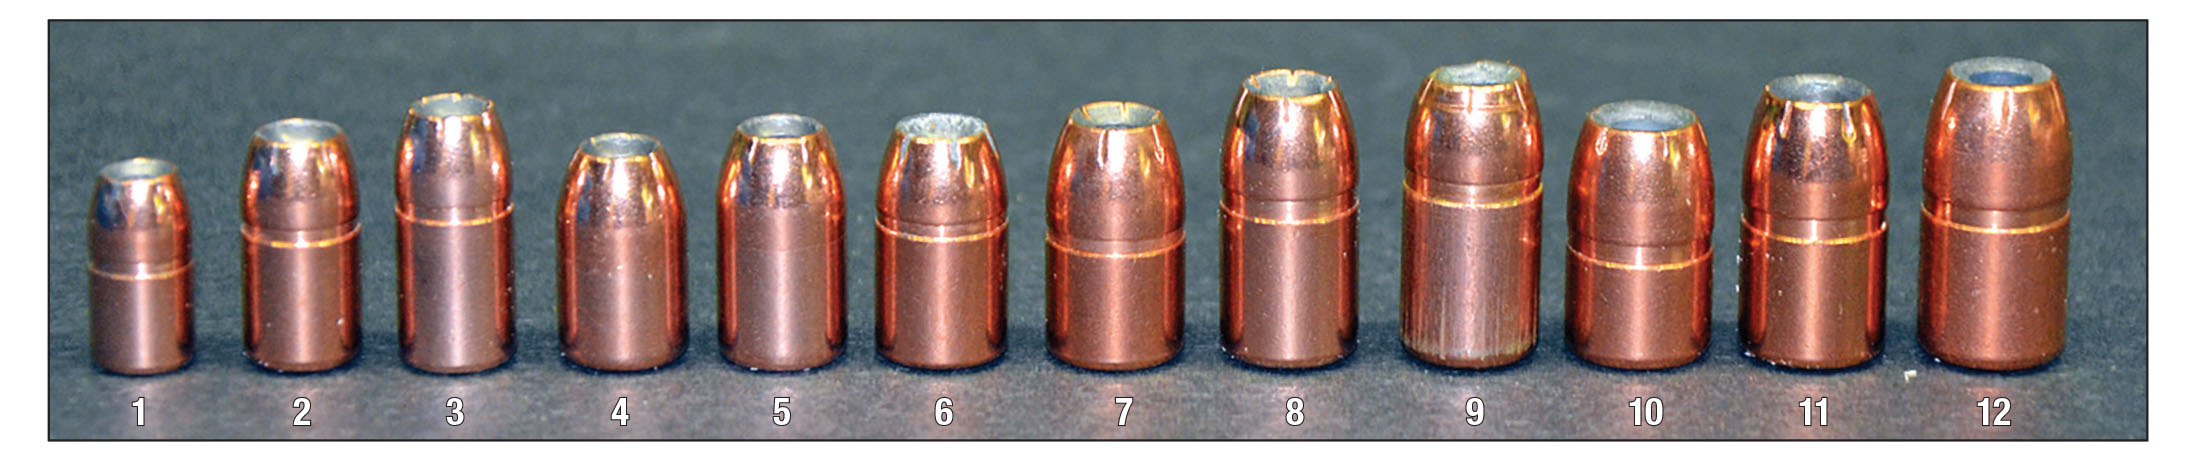 A-Frame Bullets tested include the (1) .312 inch, 100 grains, (2) .357 inch, 158 grains, (3) .357 inch, 180 grains, (4) 10mm, 180 grains, (5) 10mm, 200 grains, (6) .410 inch, 210 grains, (7) .429 inch, 240 grains, (8) .429 inch, 280 grains, (9) .429 inch, 300 grains, (10) .452 inch, 265 grains, (11) .452 inch, 300 grains and (12) .452 inch, 325 grains.